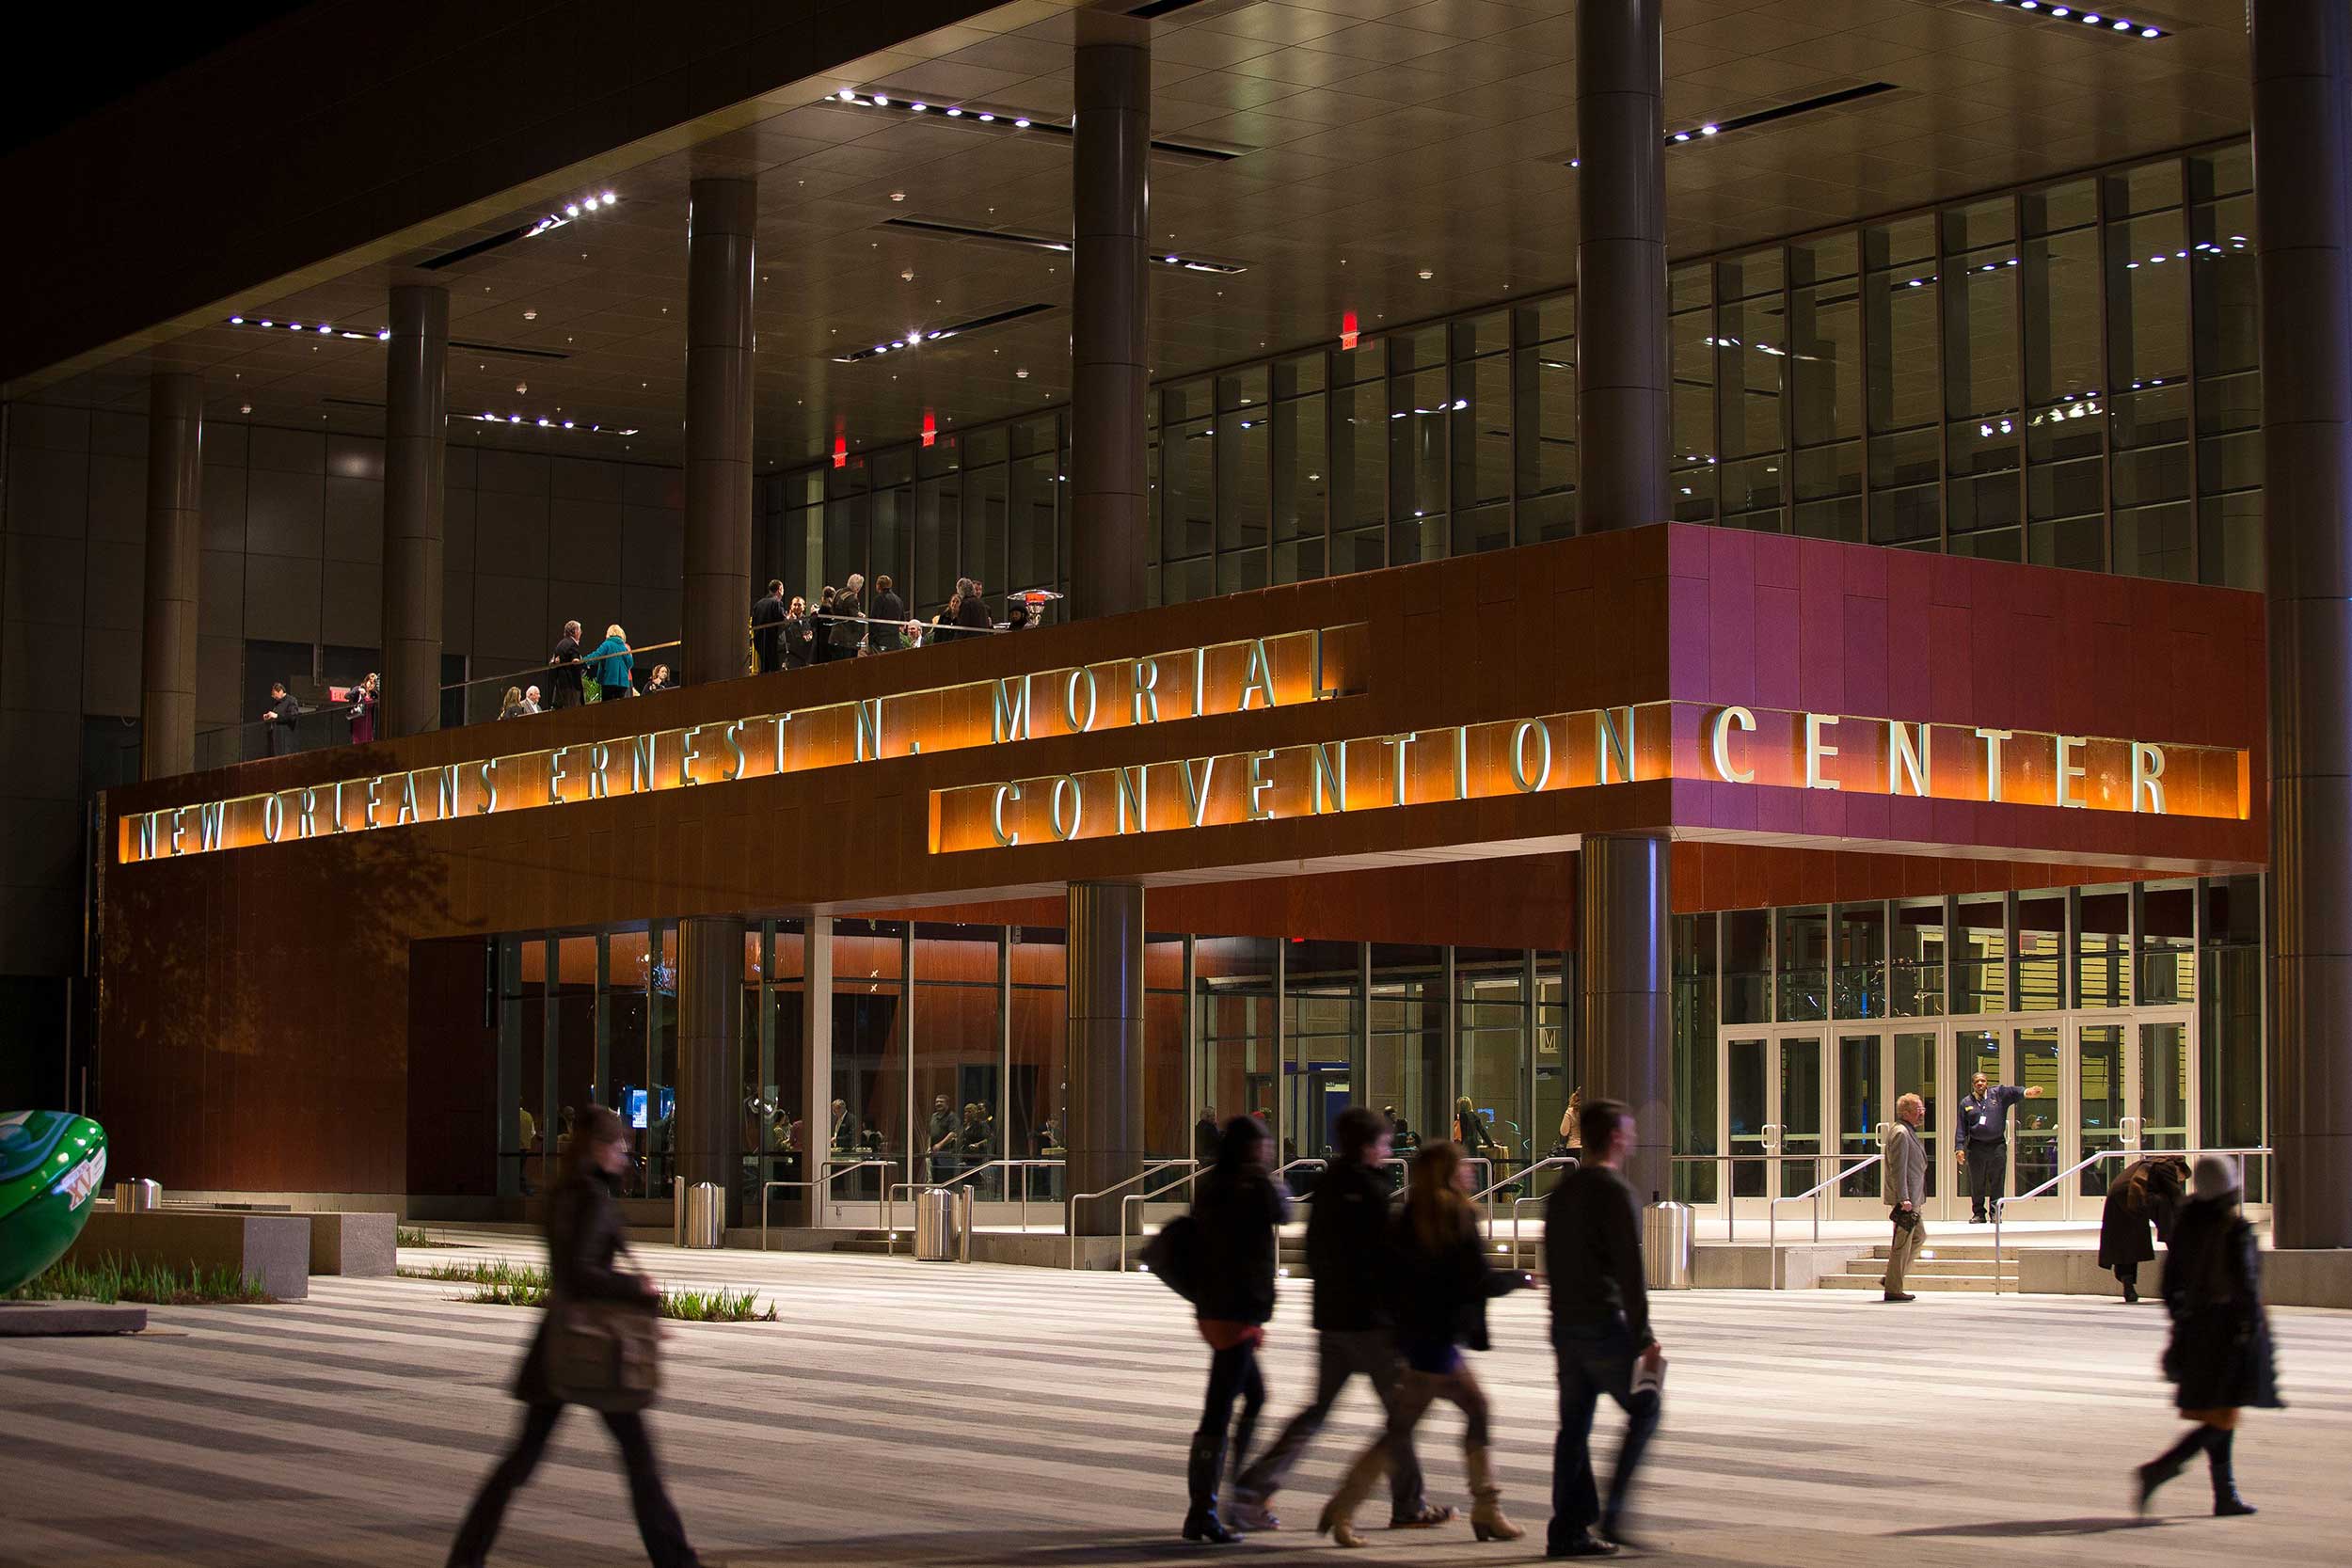 The New Orleans Ernest N. Morial Convention Center entrance at night